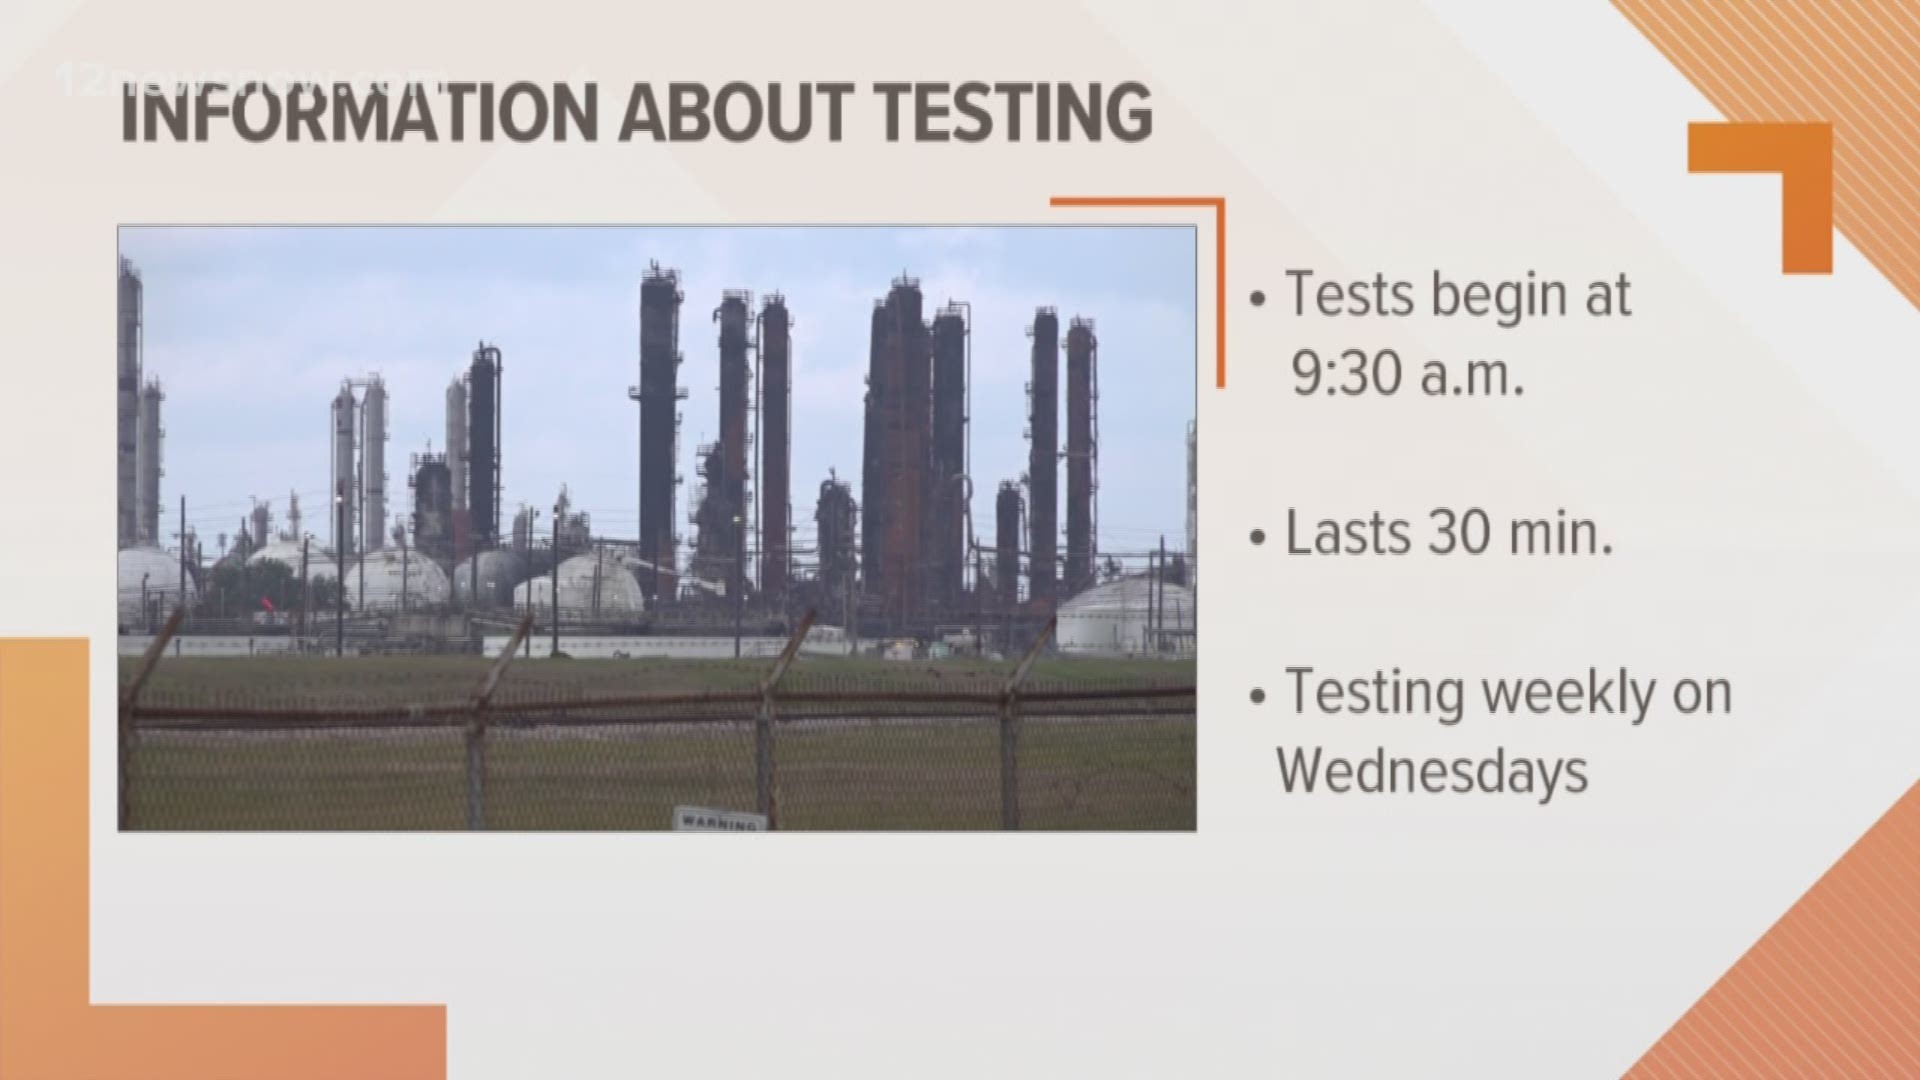 The testing will do done weekly on Wednesdays